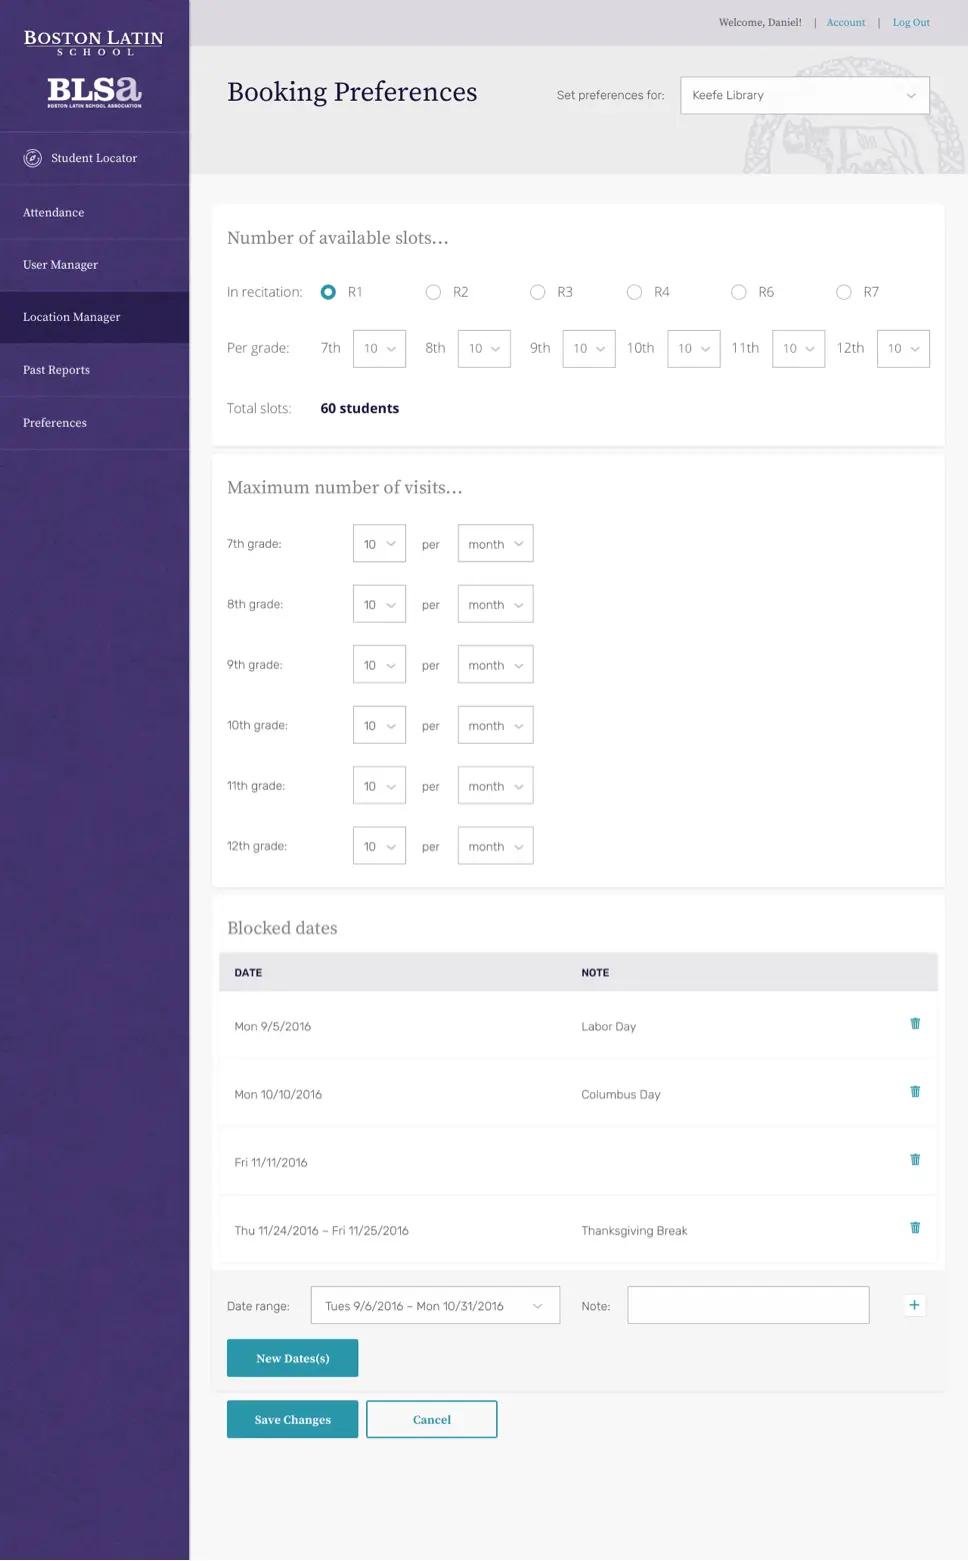 A screenshot of Boston Latin School's "Booking Preferences" page.